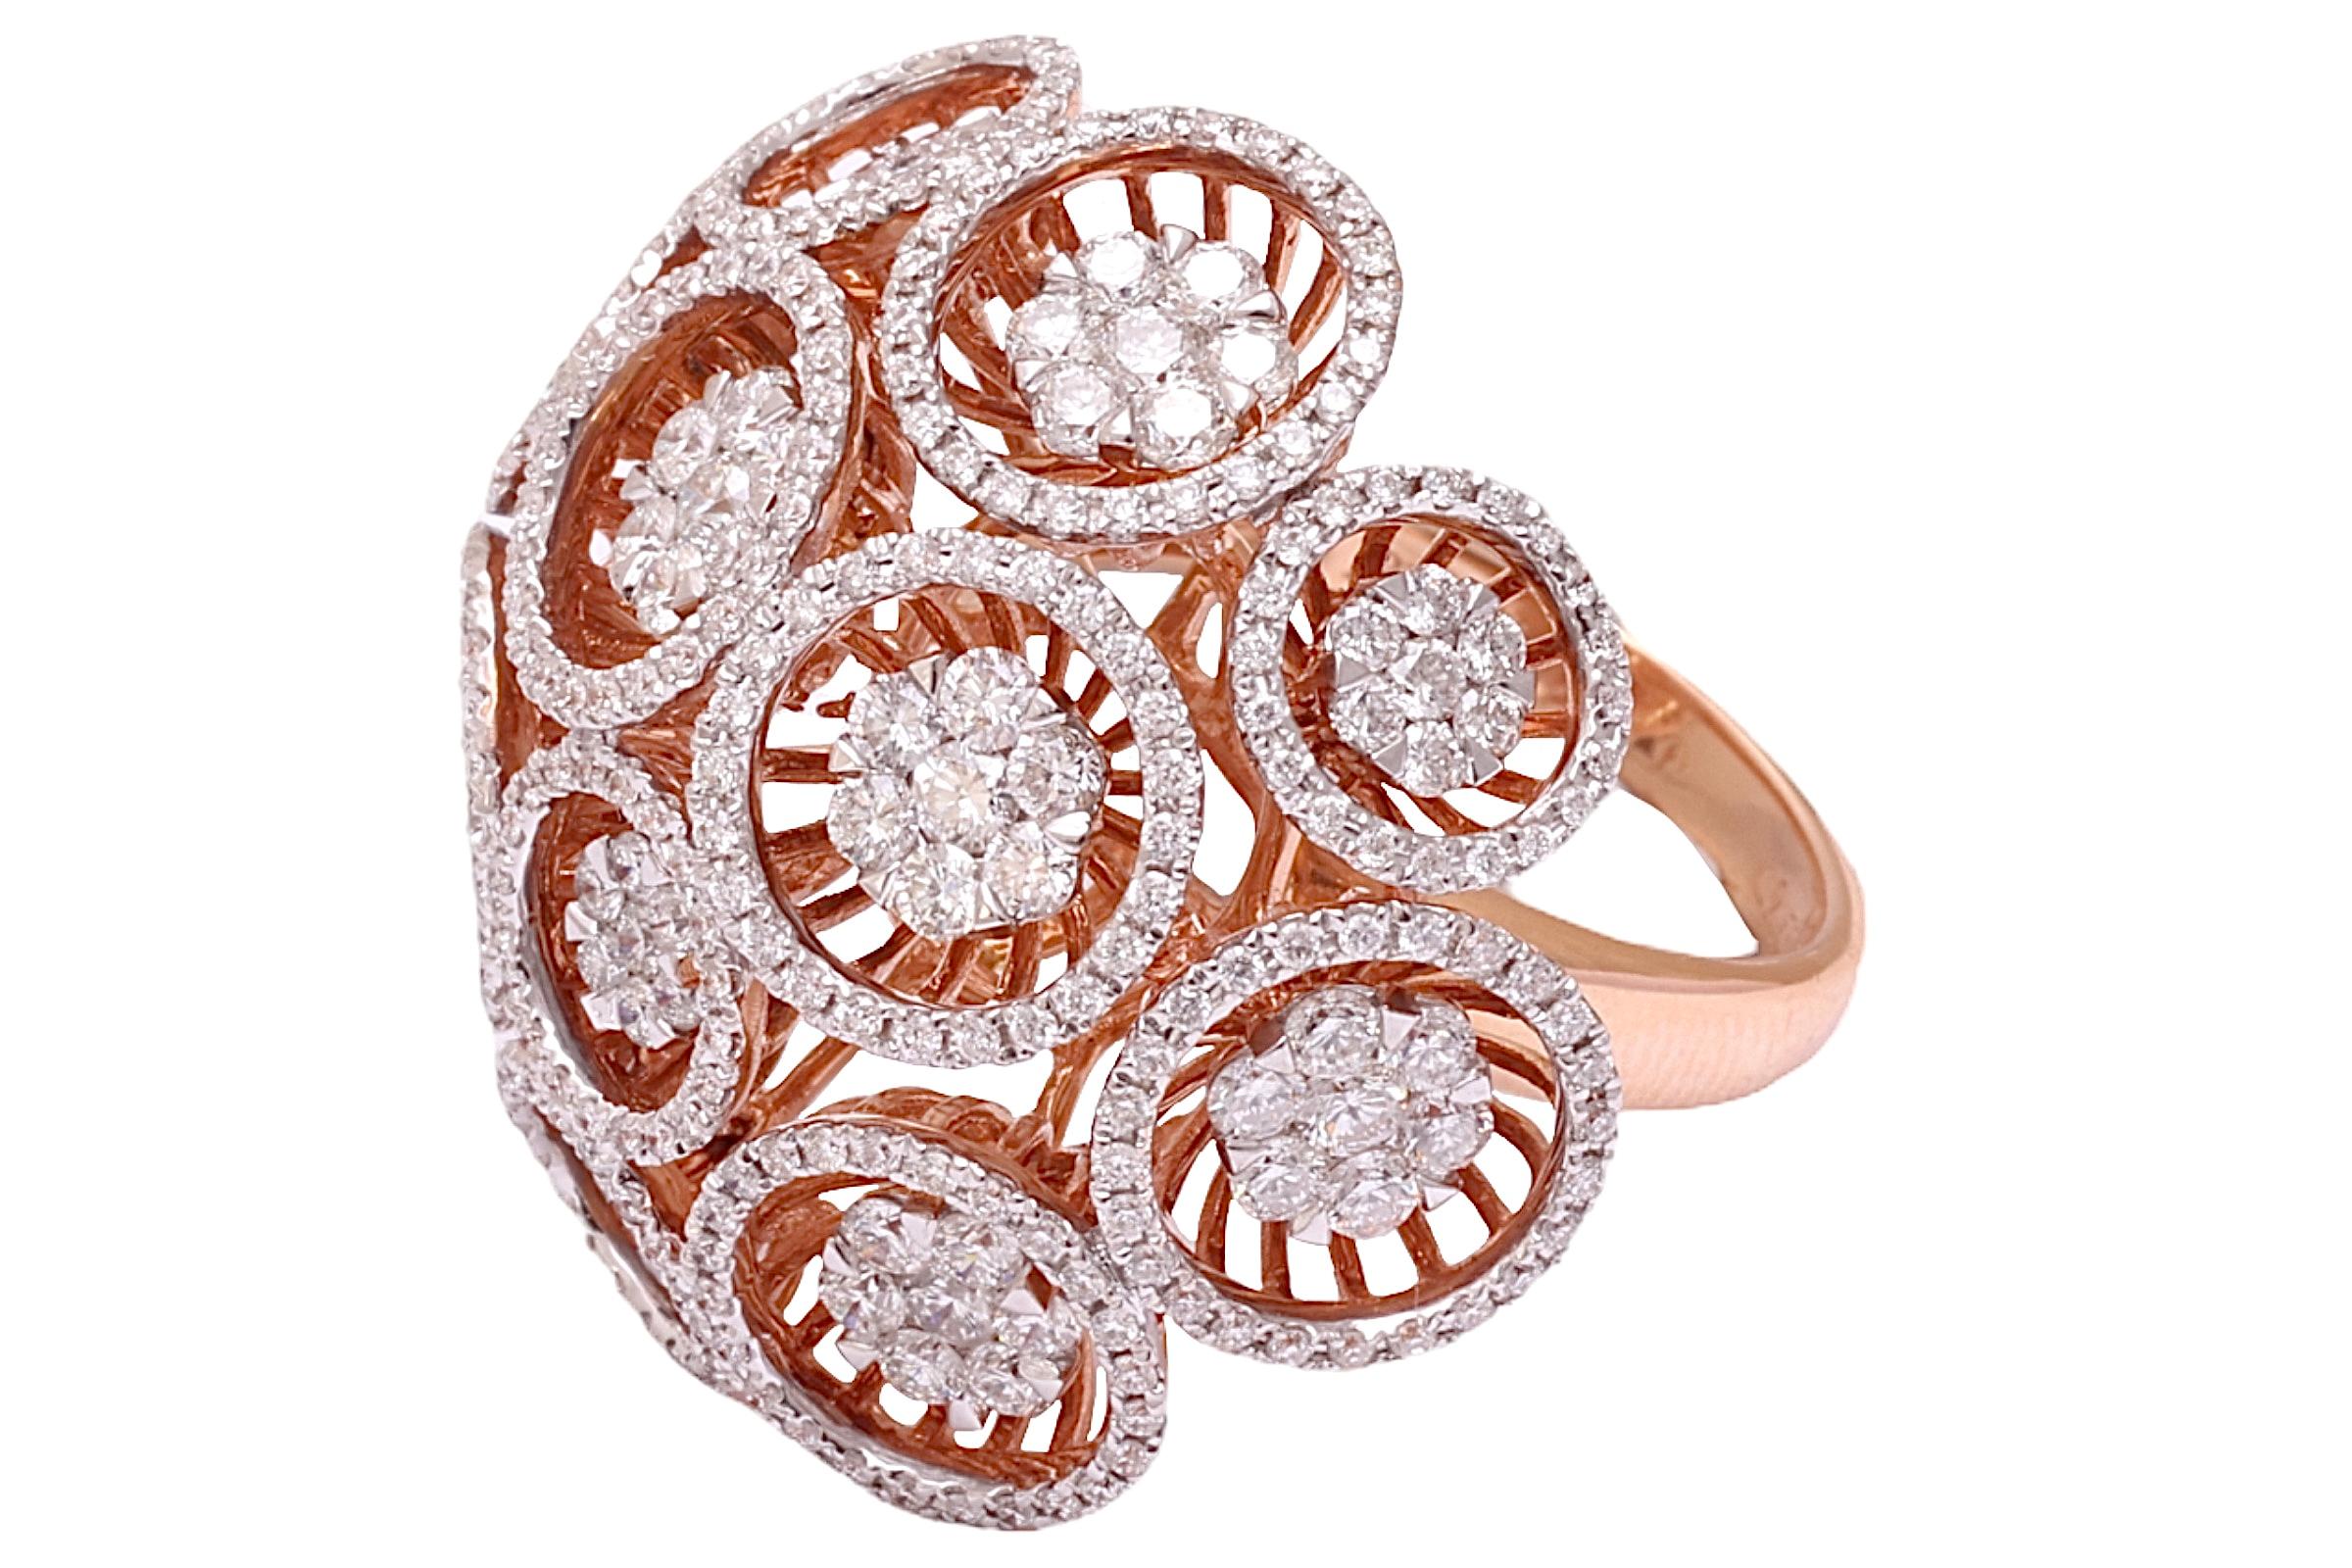 Magnificent 18 kt. Rose Gold Flower Shape  Ring With 2.6 ct. Diamonds

Diamonds: Brilliant cut diamonds together 2.6 ct.

Material: 18 kt. Rose gold

Ring size: 54.4 EU / 7 US, can be resized for free

Total weight: 15.1 gram / 0.535 oz / 9.8 dwt 